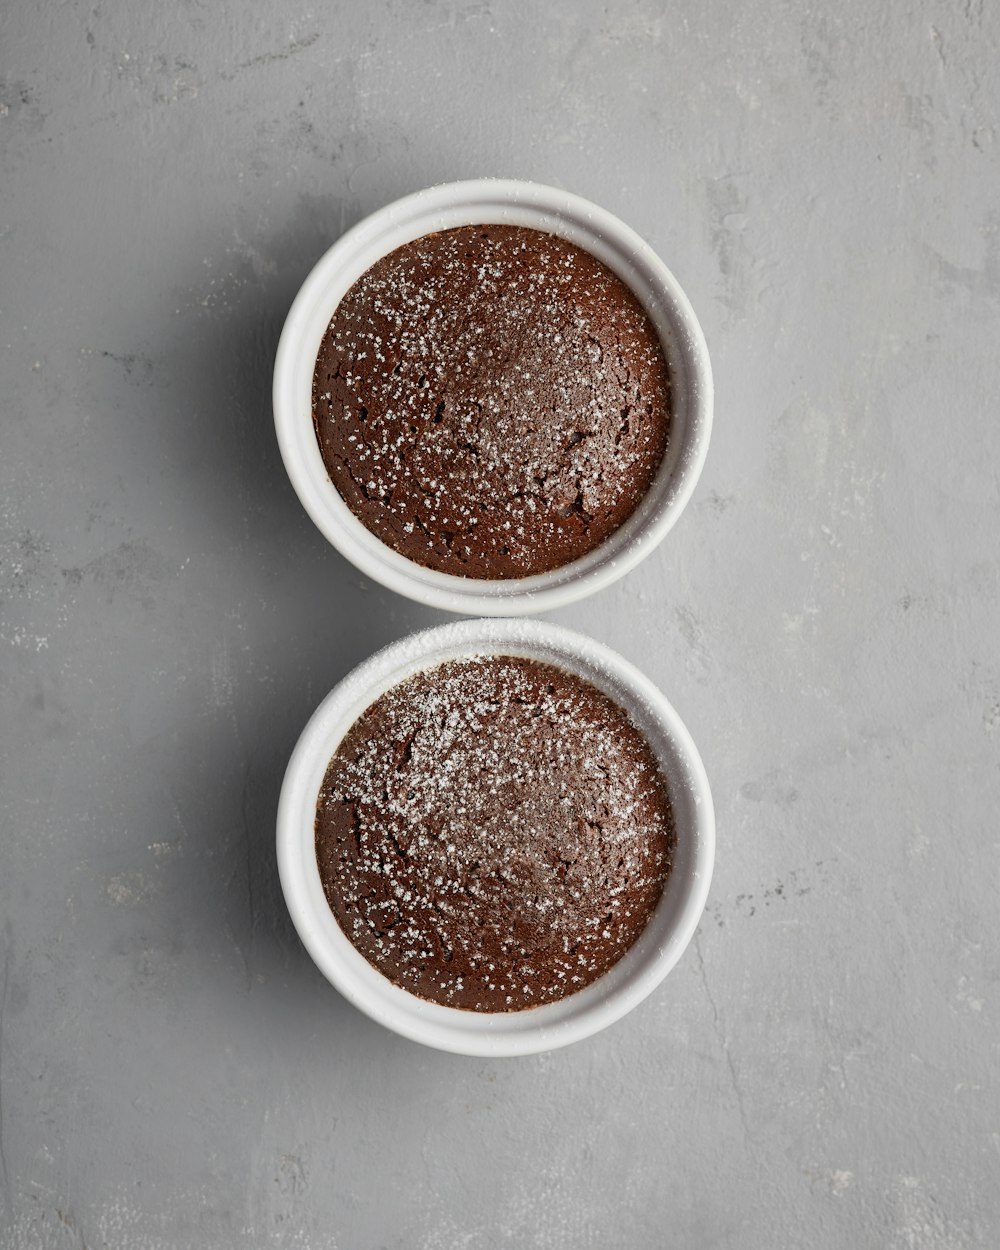 two bowls of chocolate cake on a table